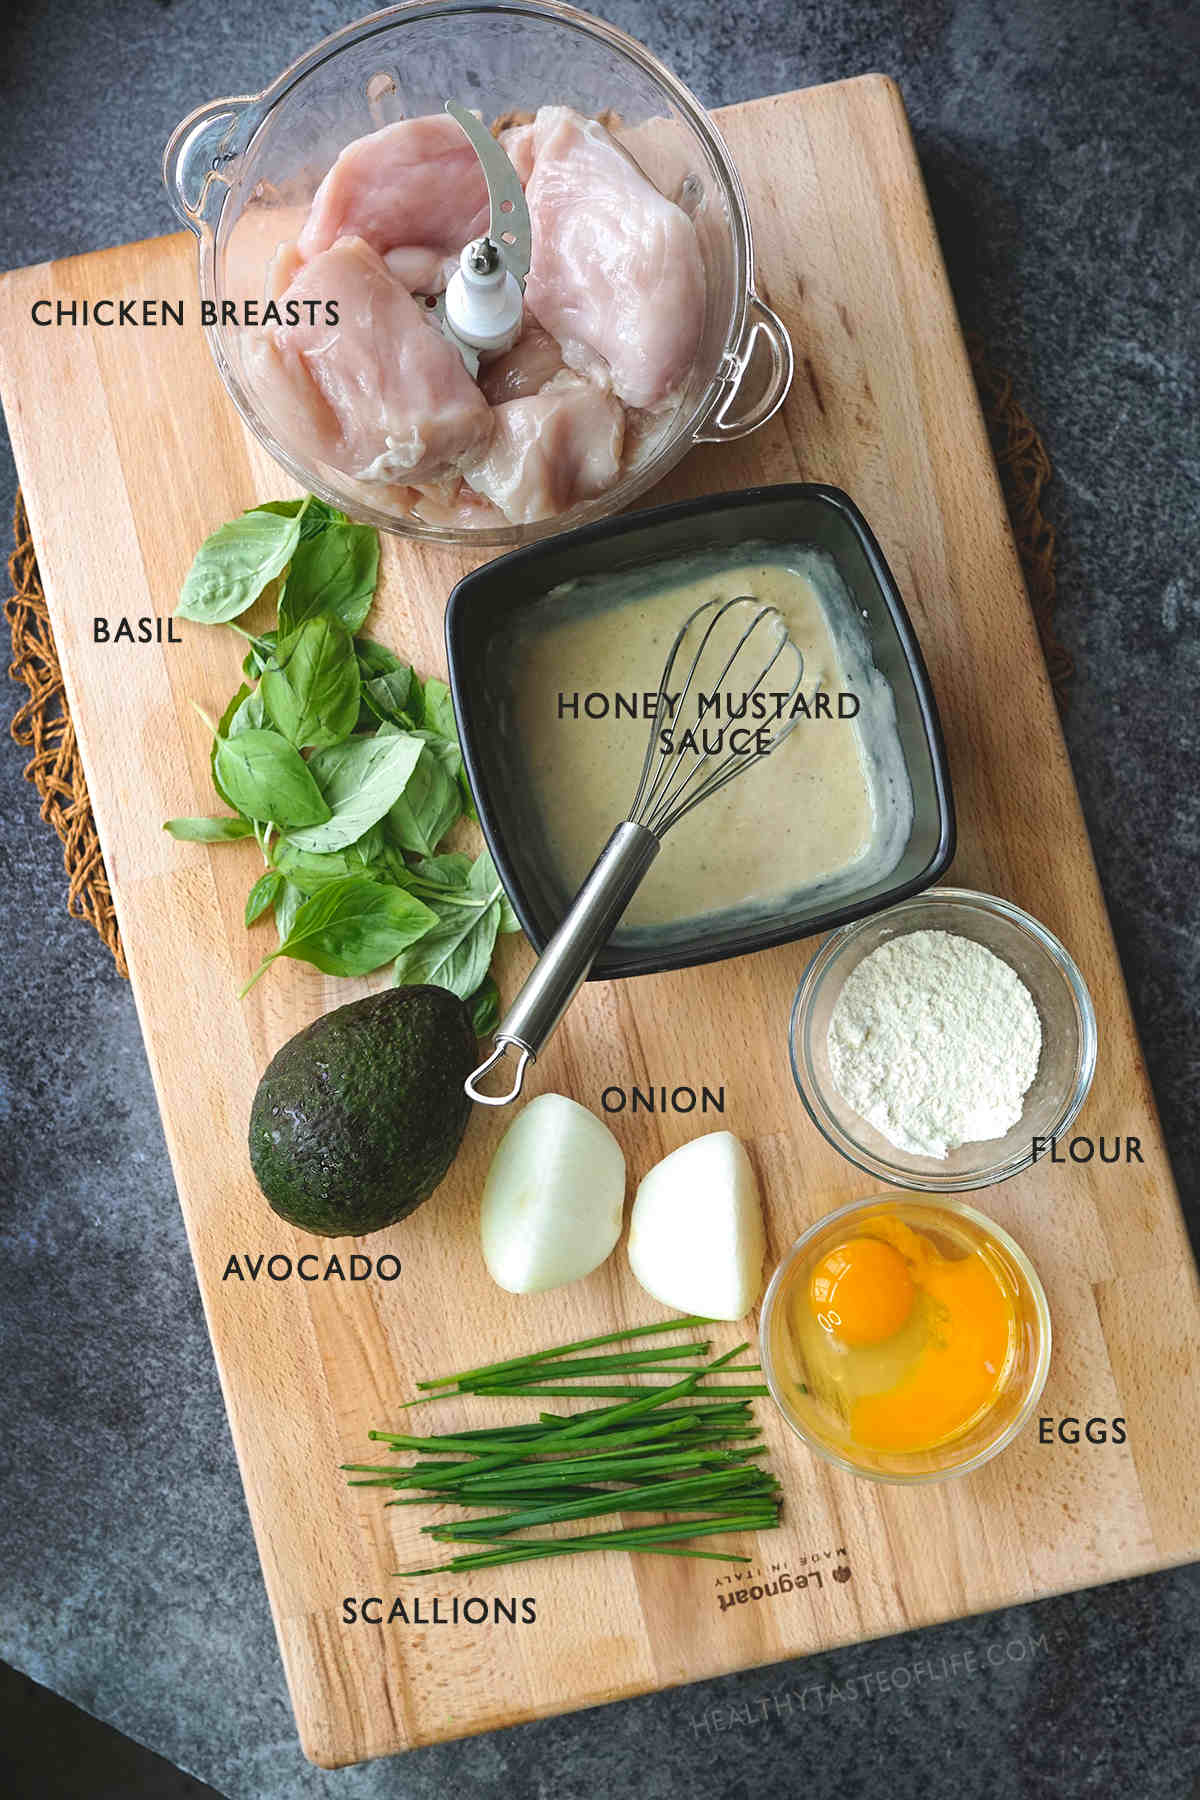 All ingredients necessary for making these chicken fritters displayed on a board for visual representation.